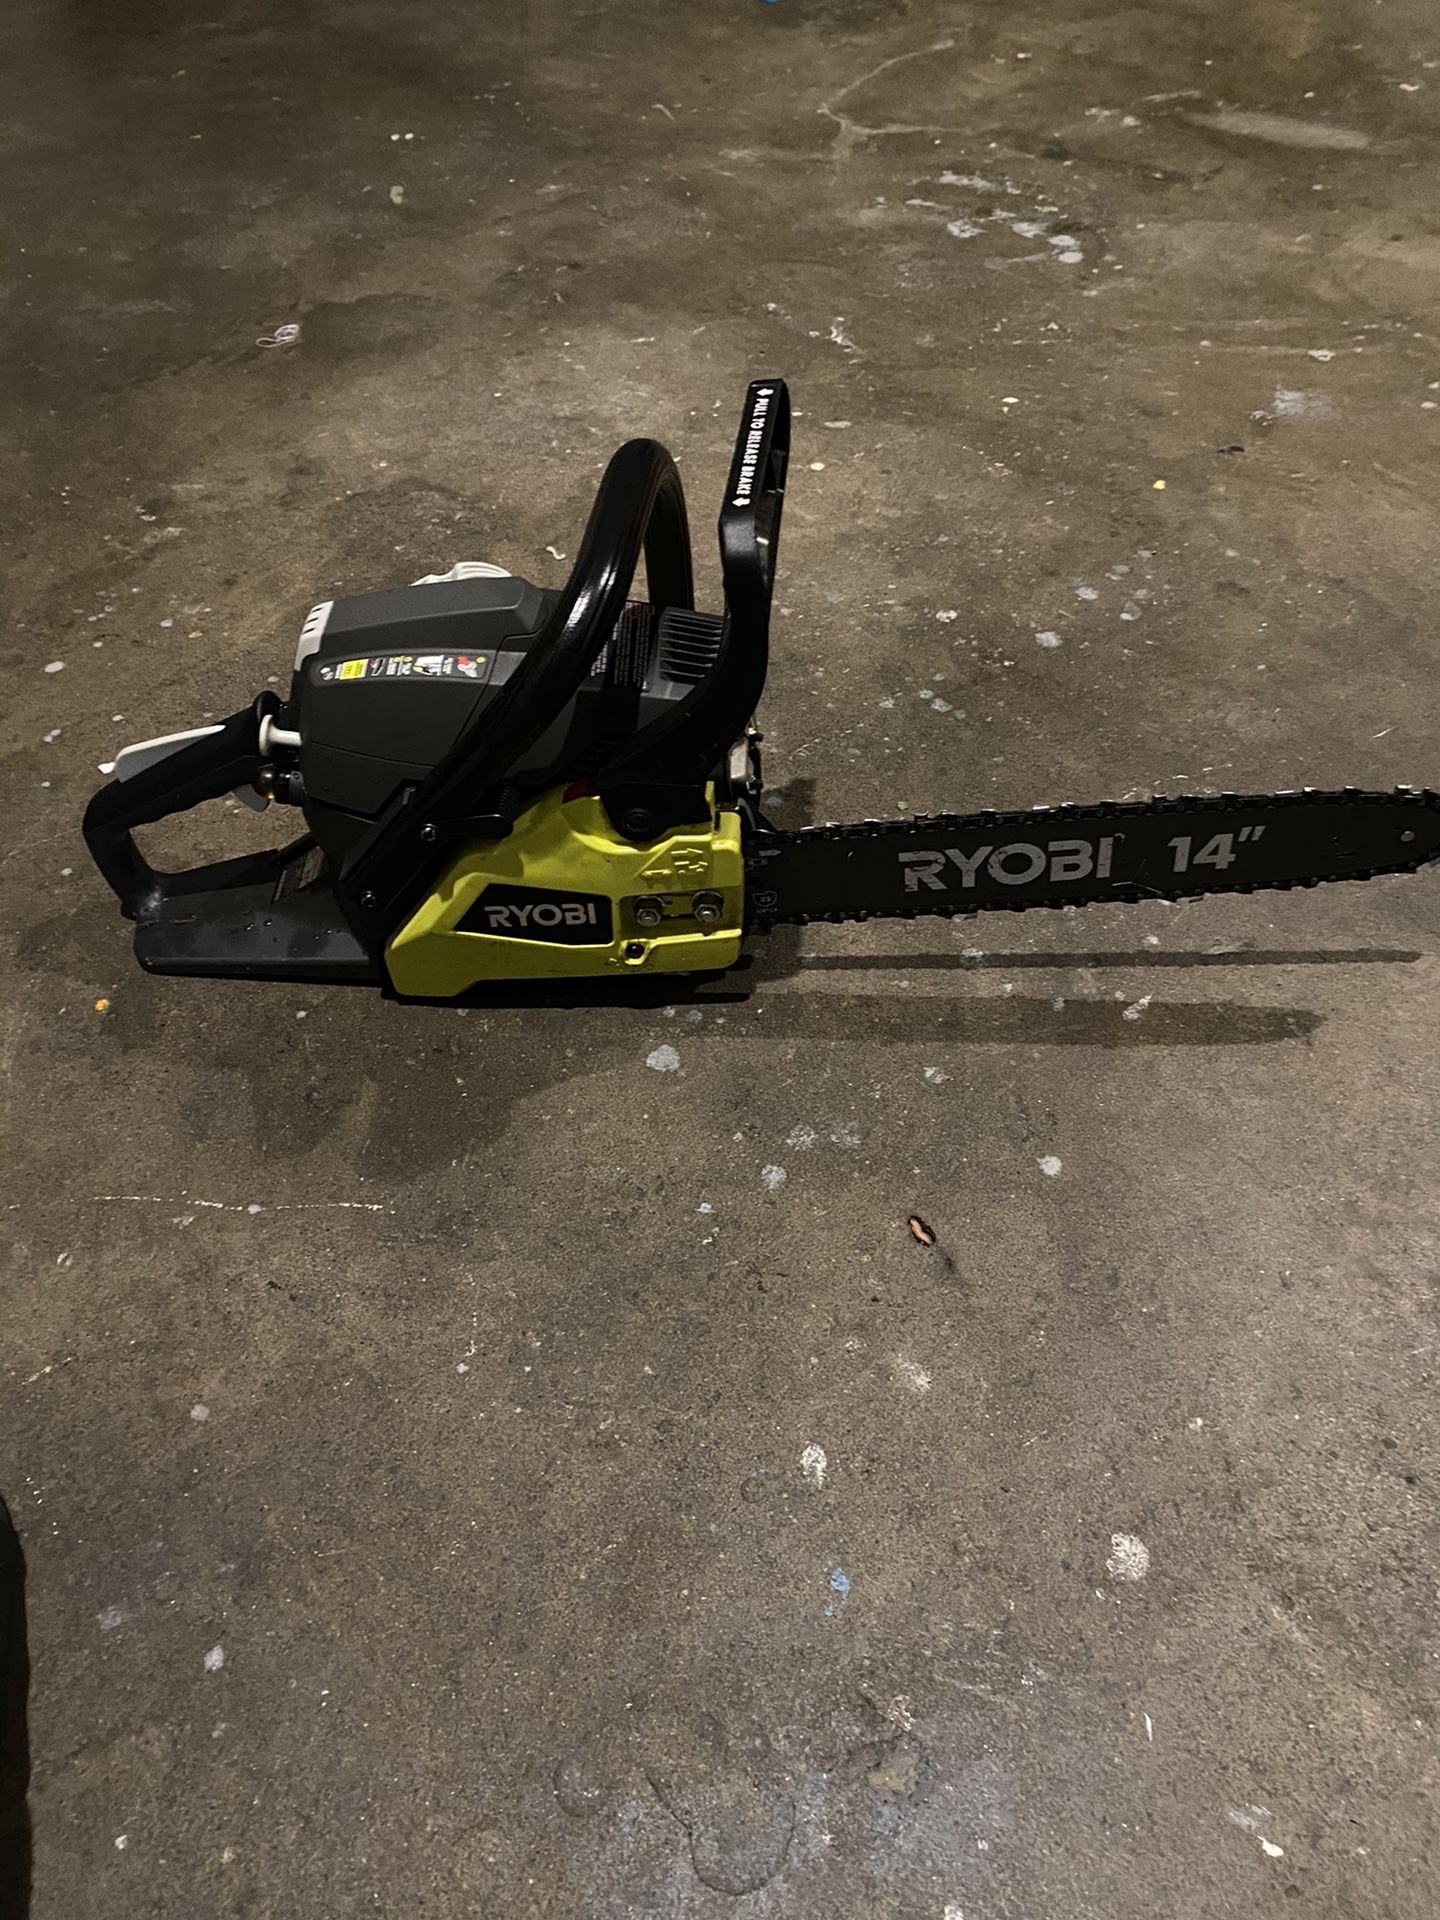 Ryobi 14” blade gas powered chainsaw. Only been used once, pretty new. $150 o.b.o.